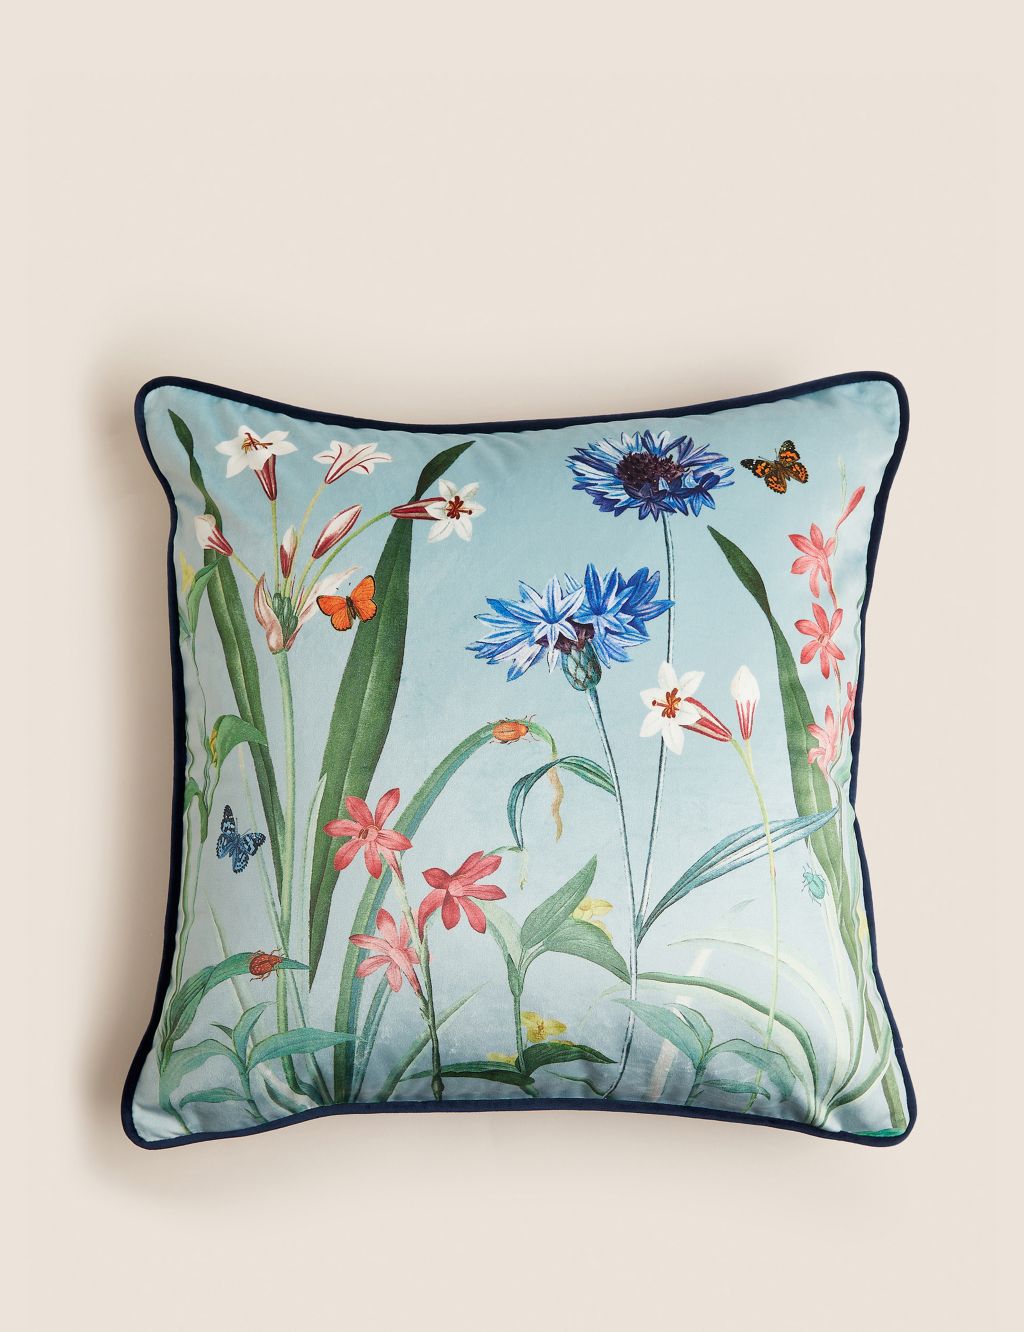 Velvet Butterfly Floral Piped Cushion image 1